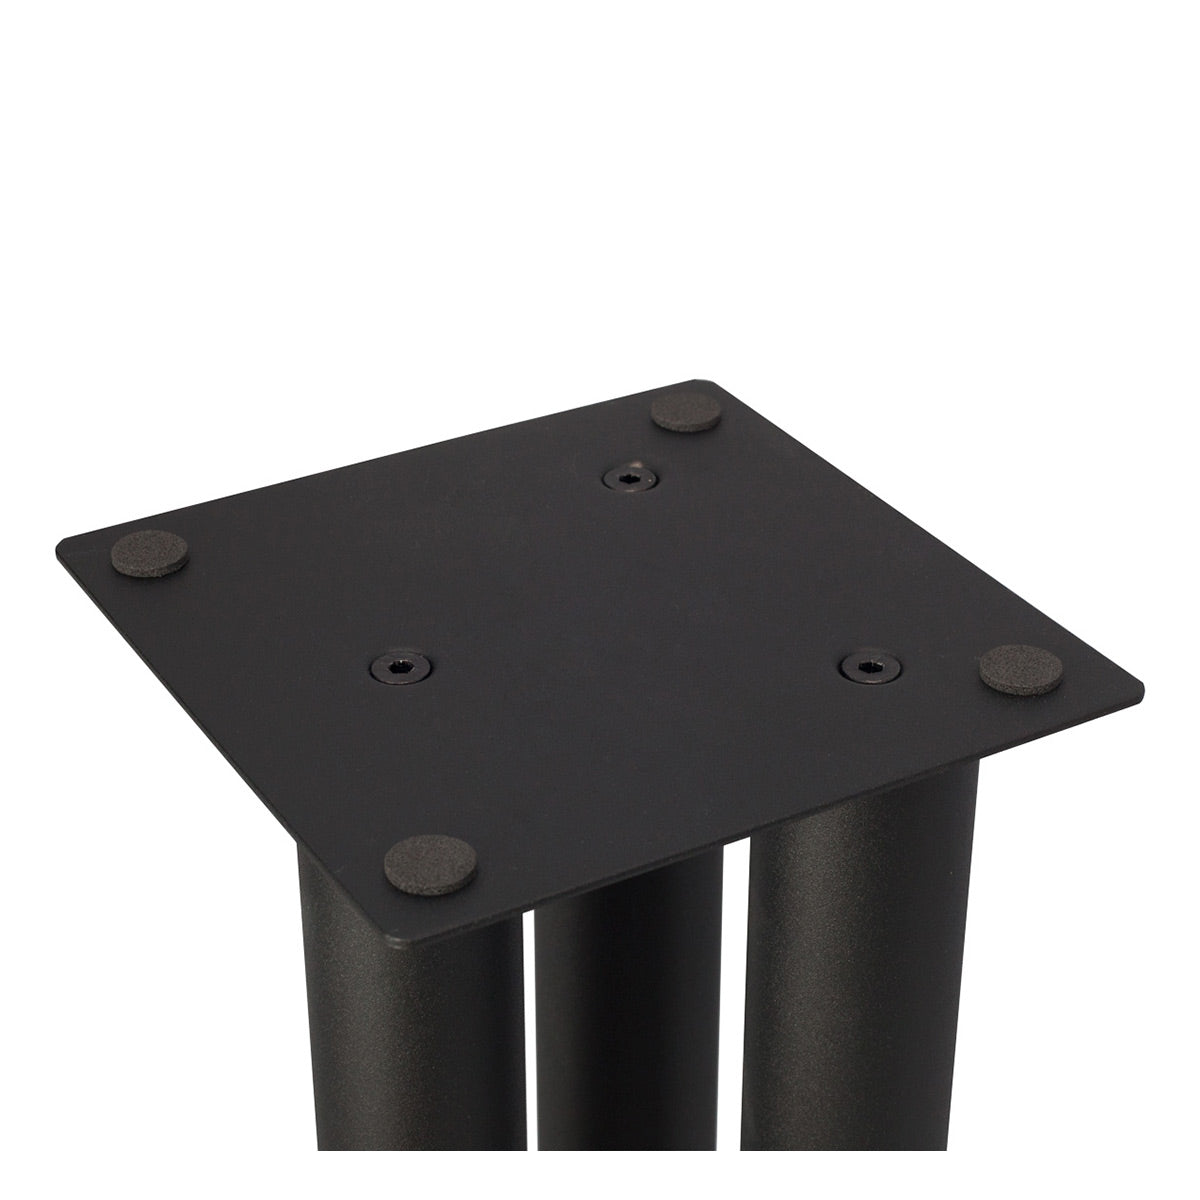 Pangea Audio LS300 24 in. Speaker Stand with 6" x 6" Top Plate - Pair (Black)